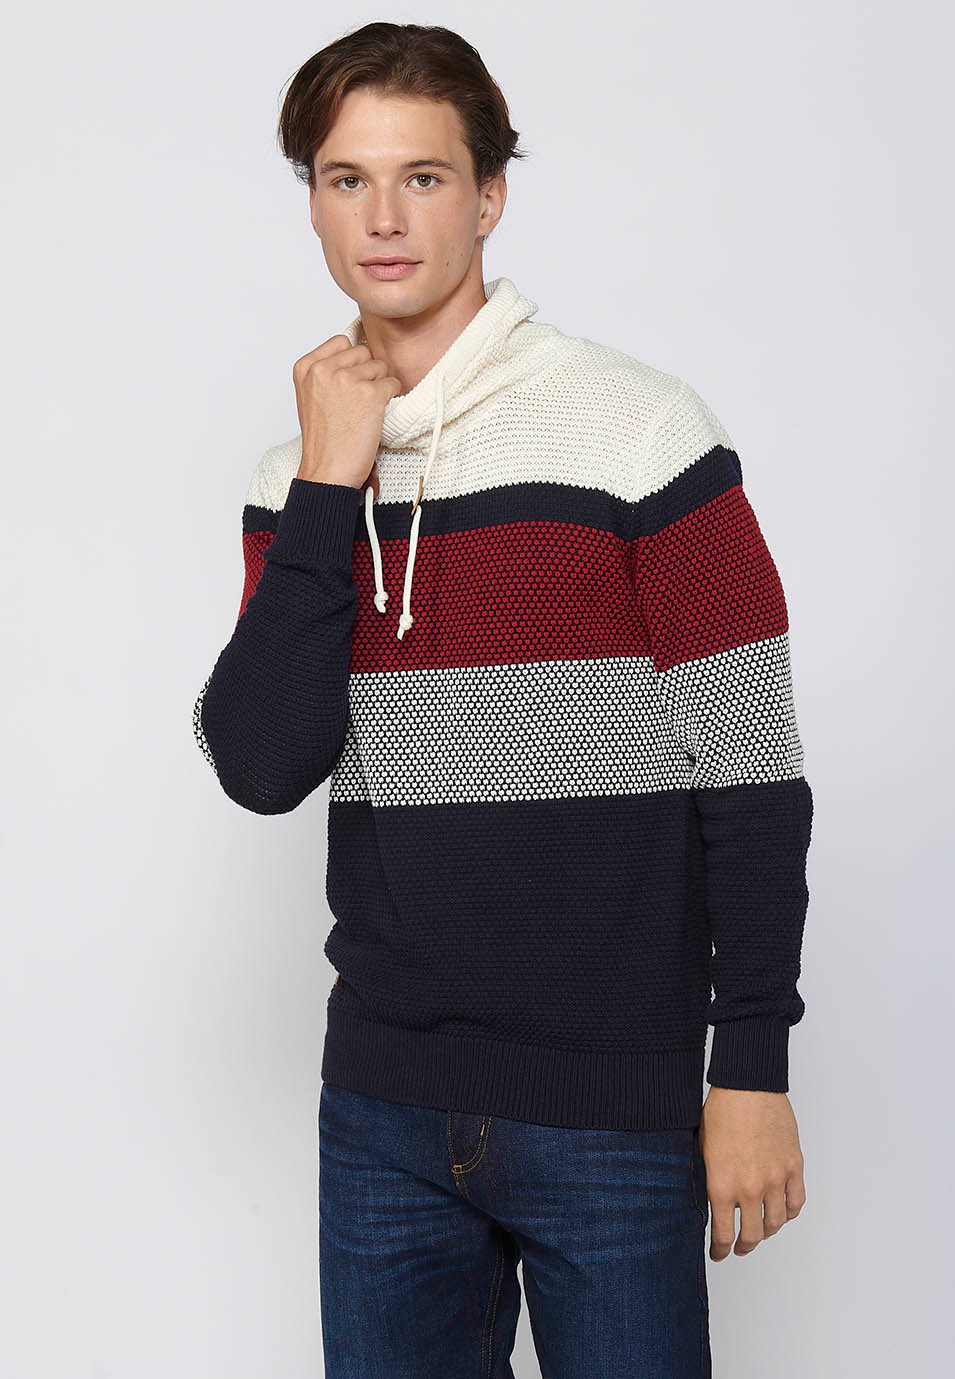 Long-sleeved sweater with adjustable turtleneck with drawstring, navy cotton textured striped tricot for men 7